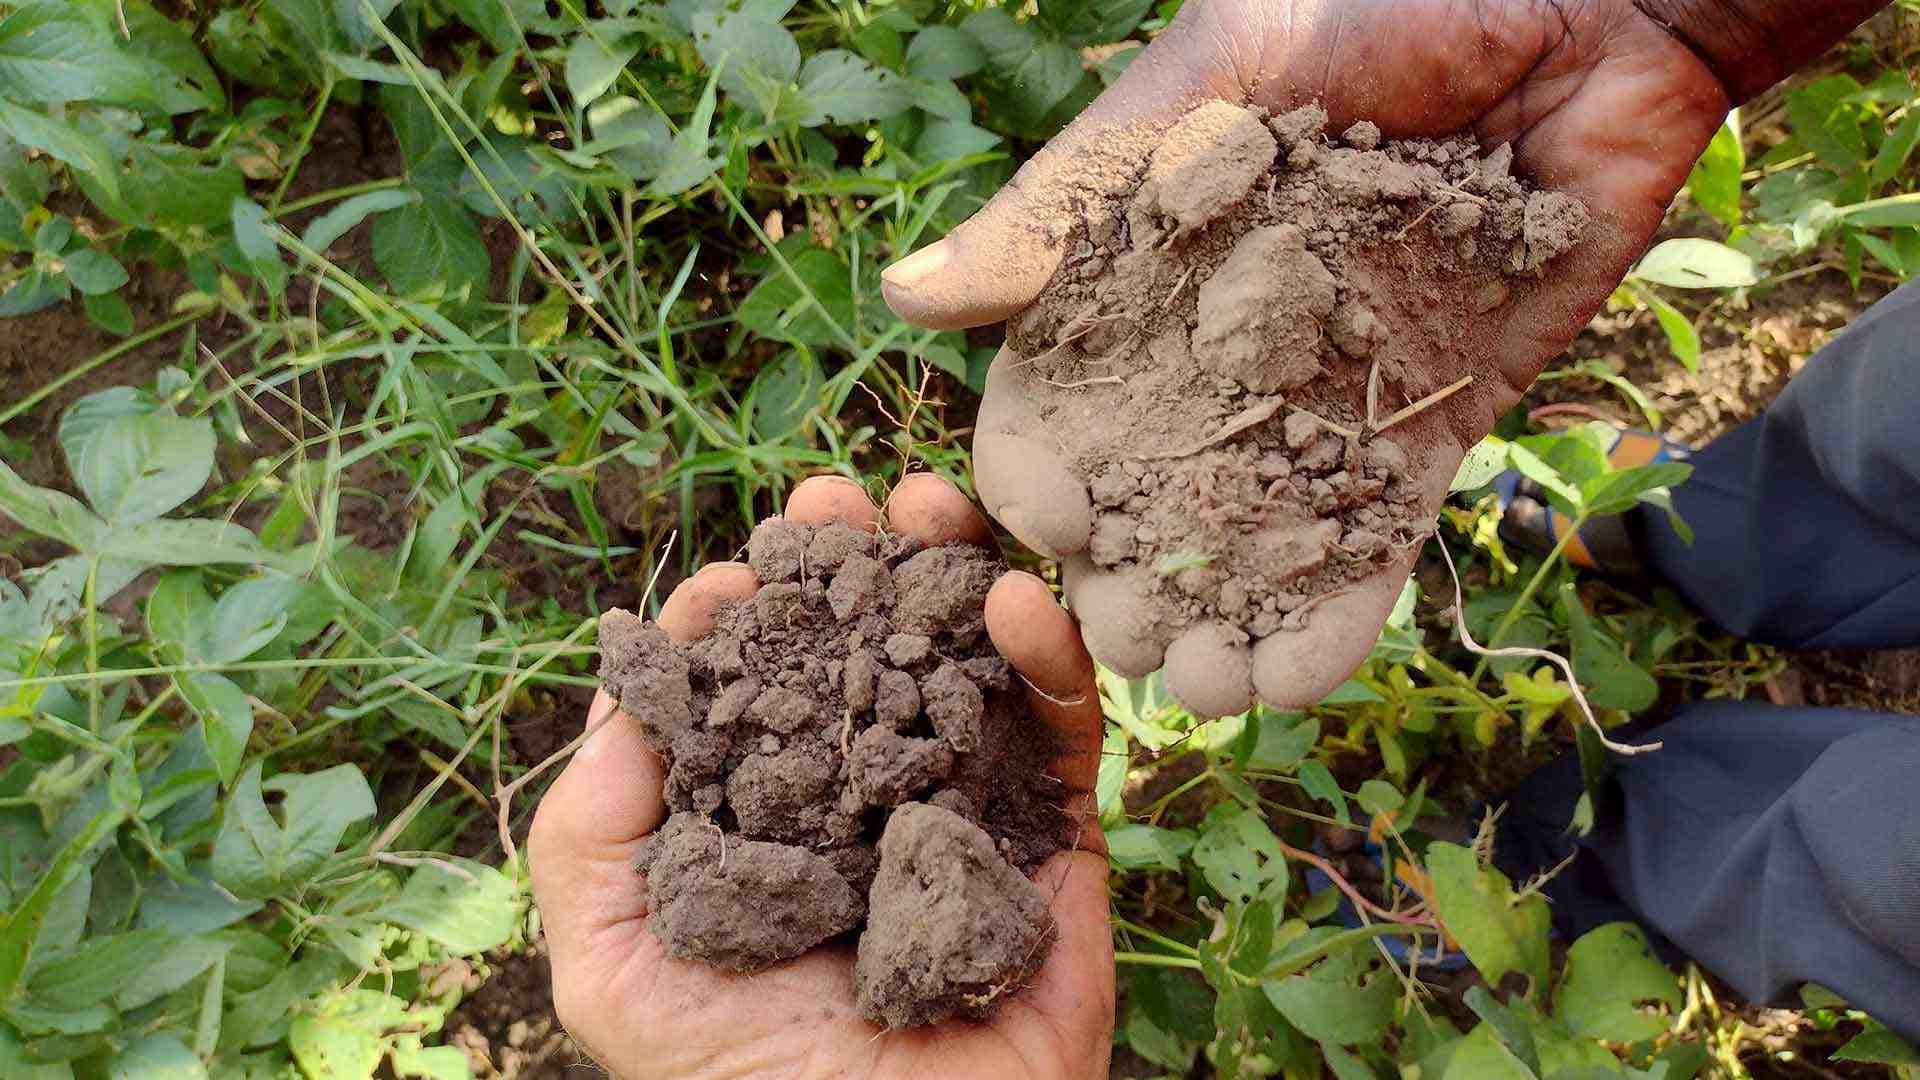 Two hands hold soil